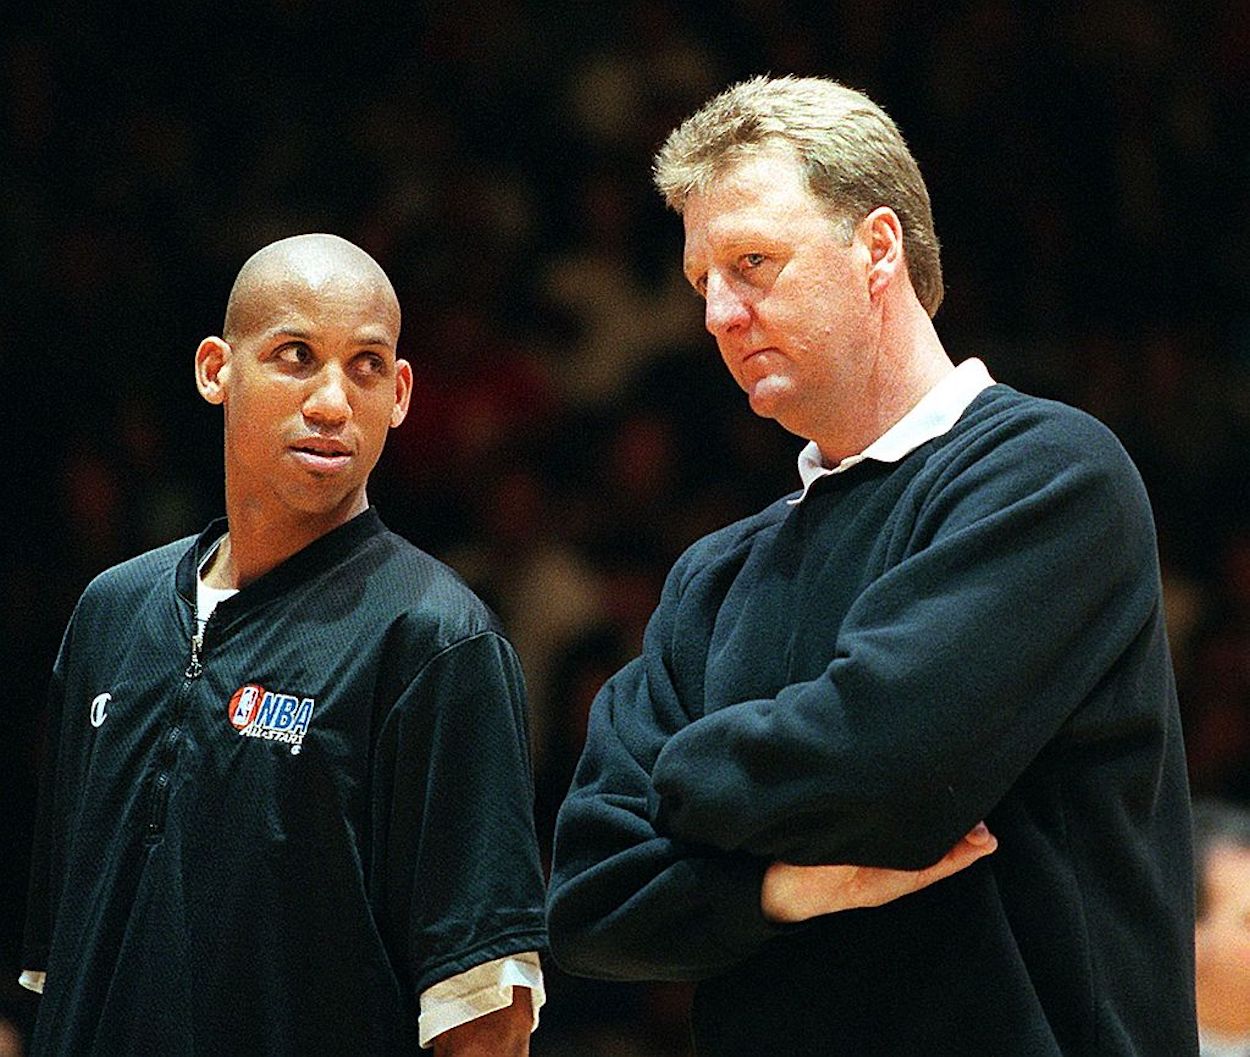 Larry Bird Paid a Young Reggie Miller a High Compliment Before Putting Him in His Place